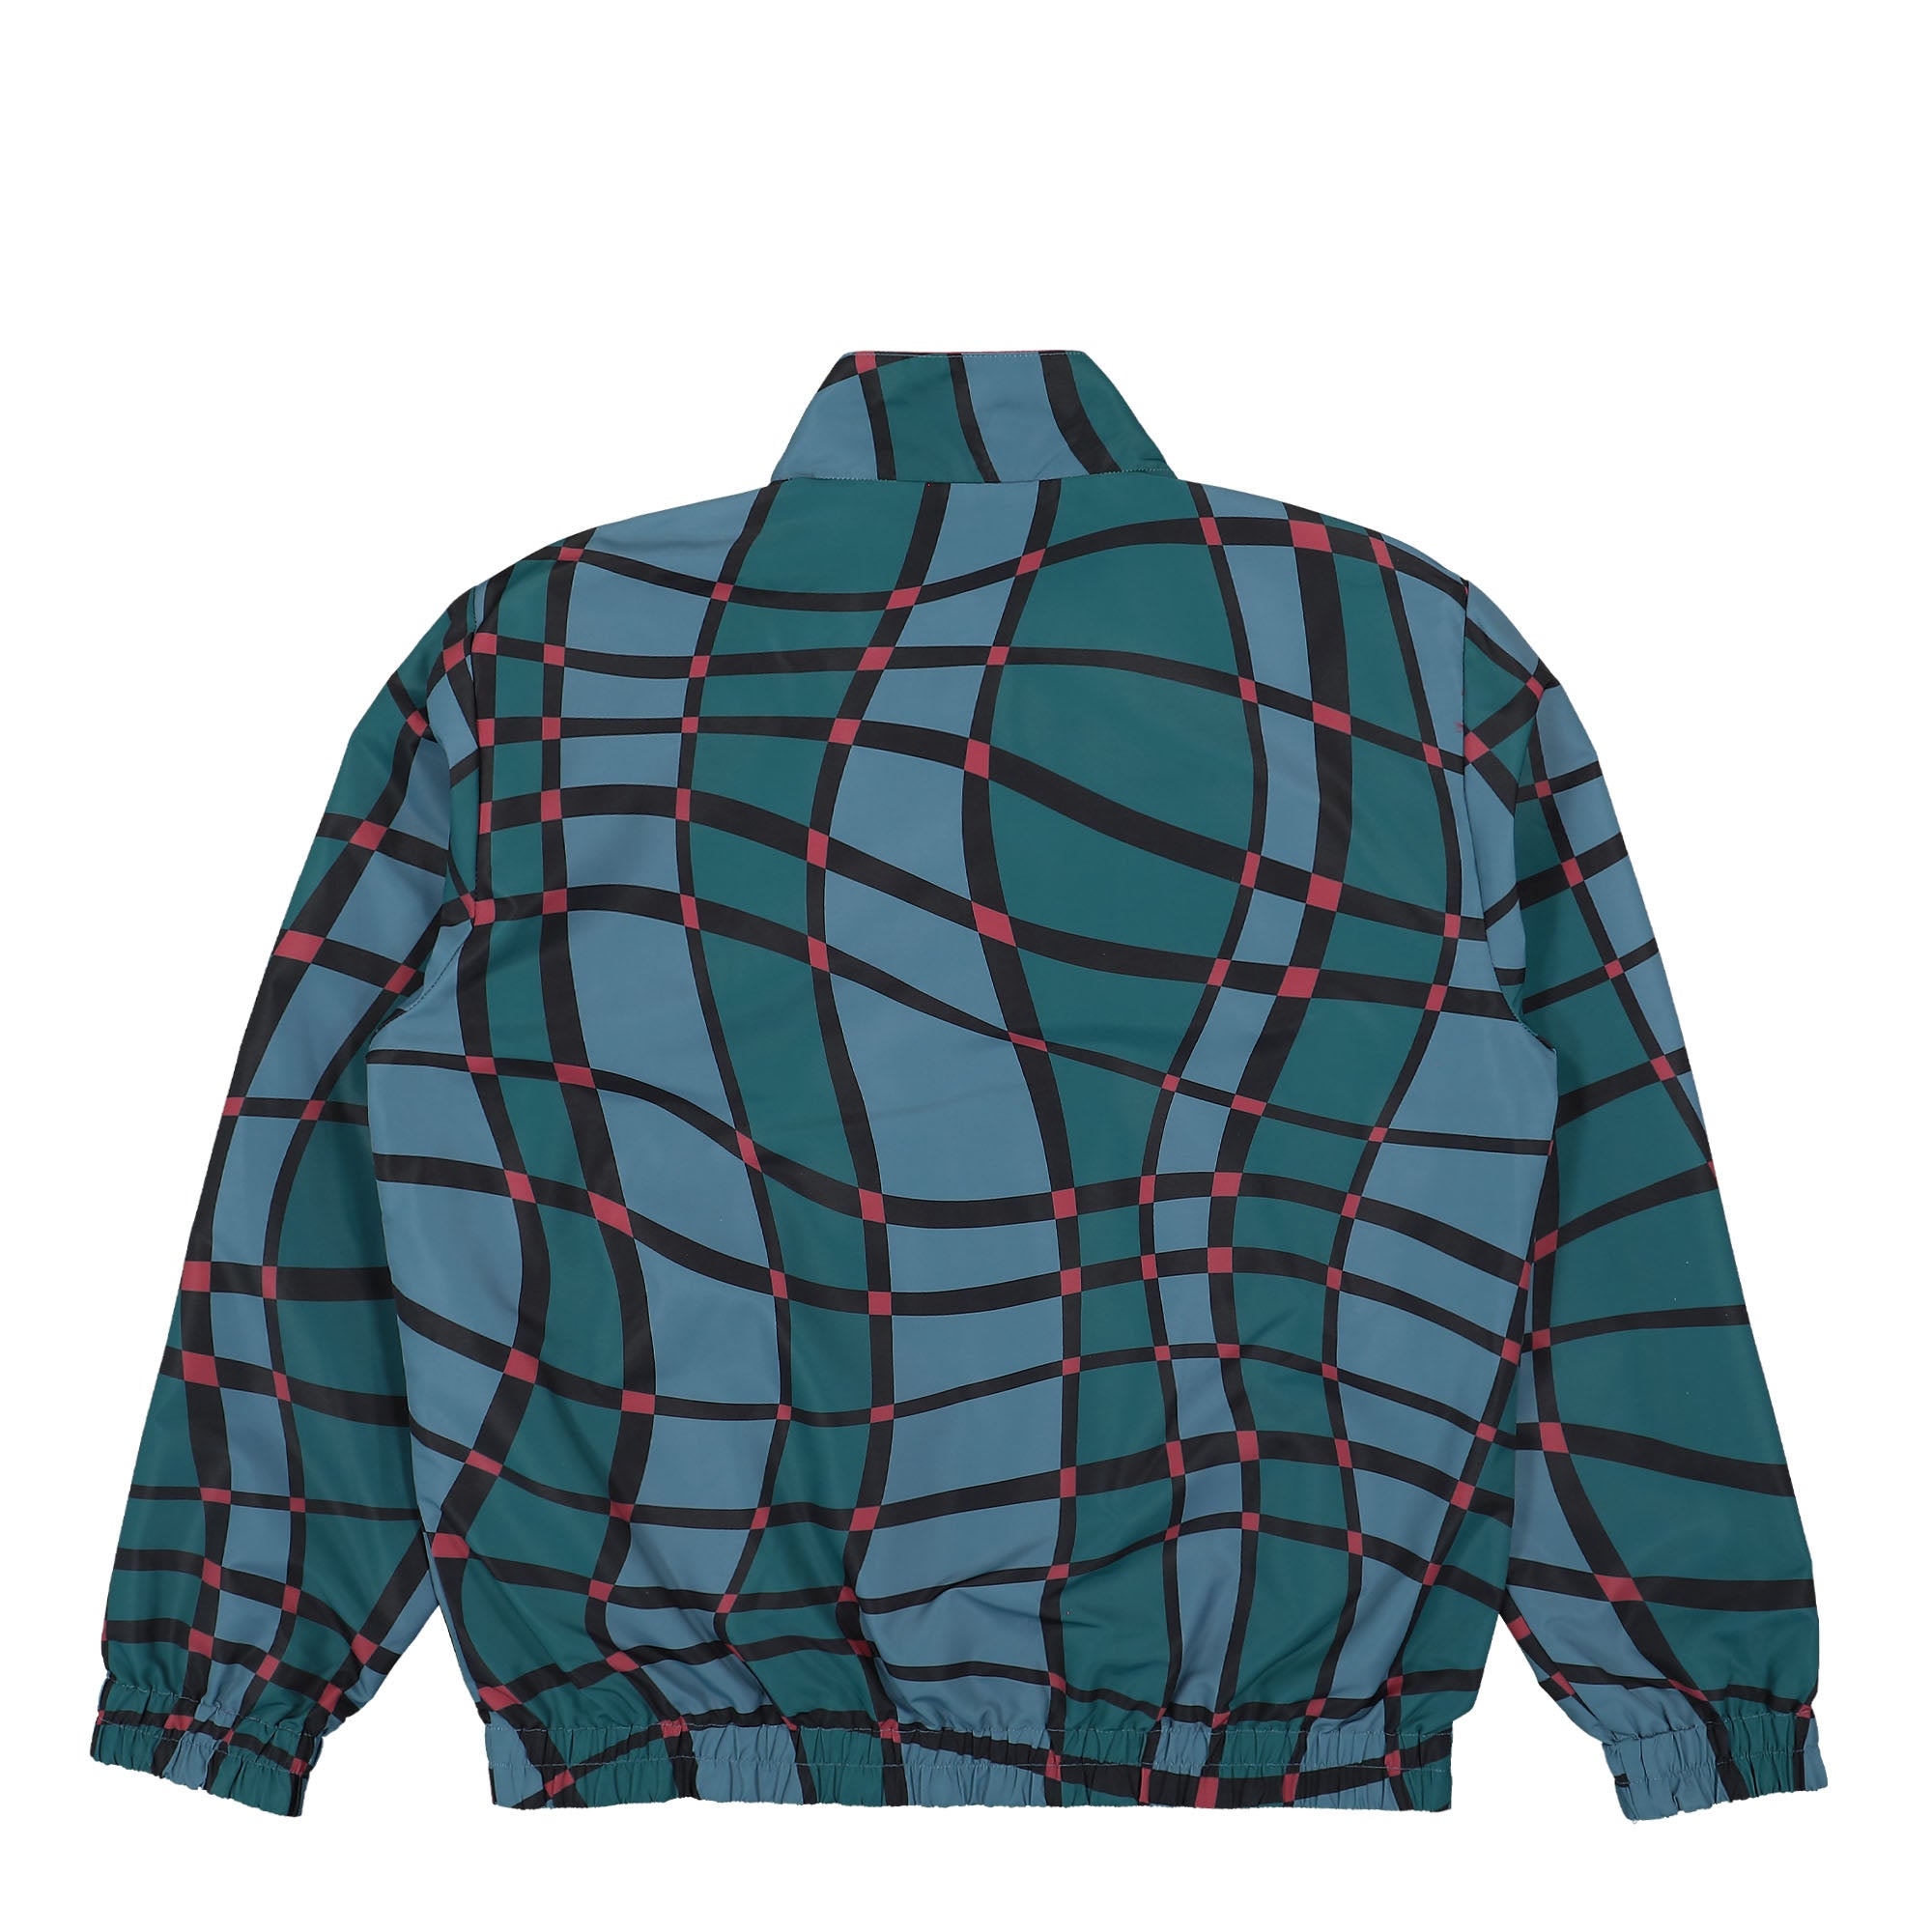 Squared Waves Pattern Track Top (Multi Check)